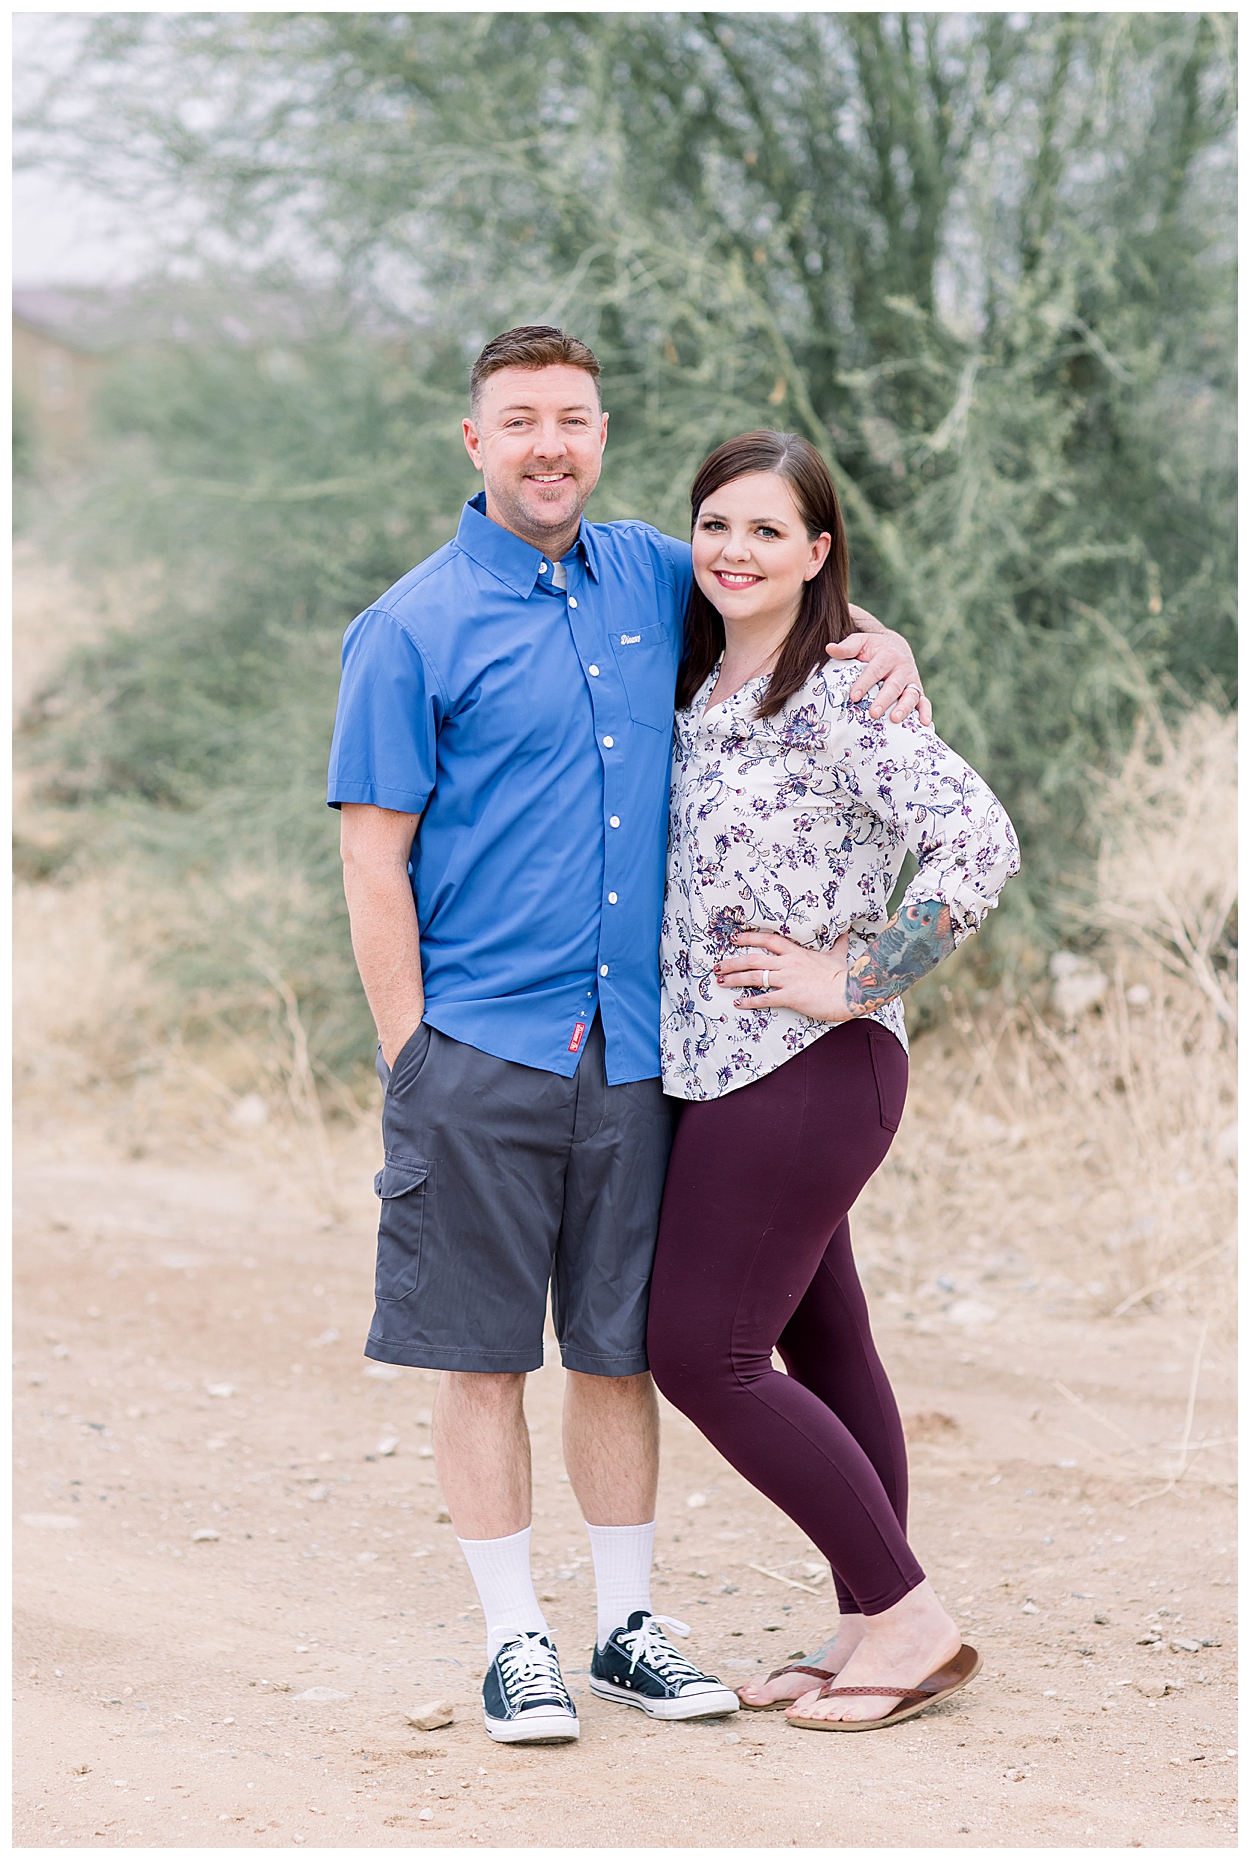 Cromer Family Pictures, Husband and Wife Picture, Desert Family Session, Navy, Burgundy, Kids Christmas